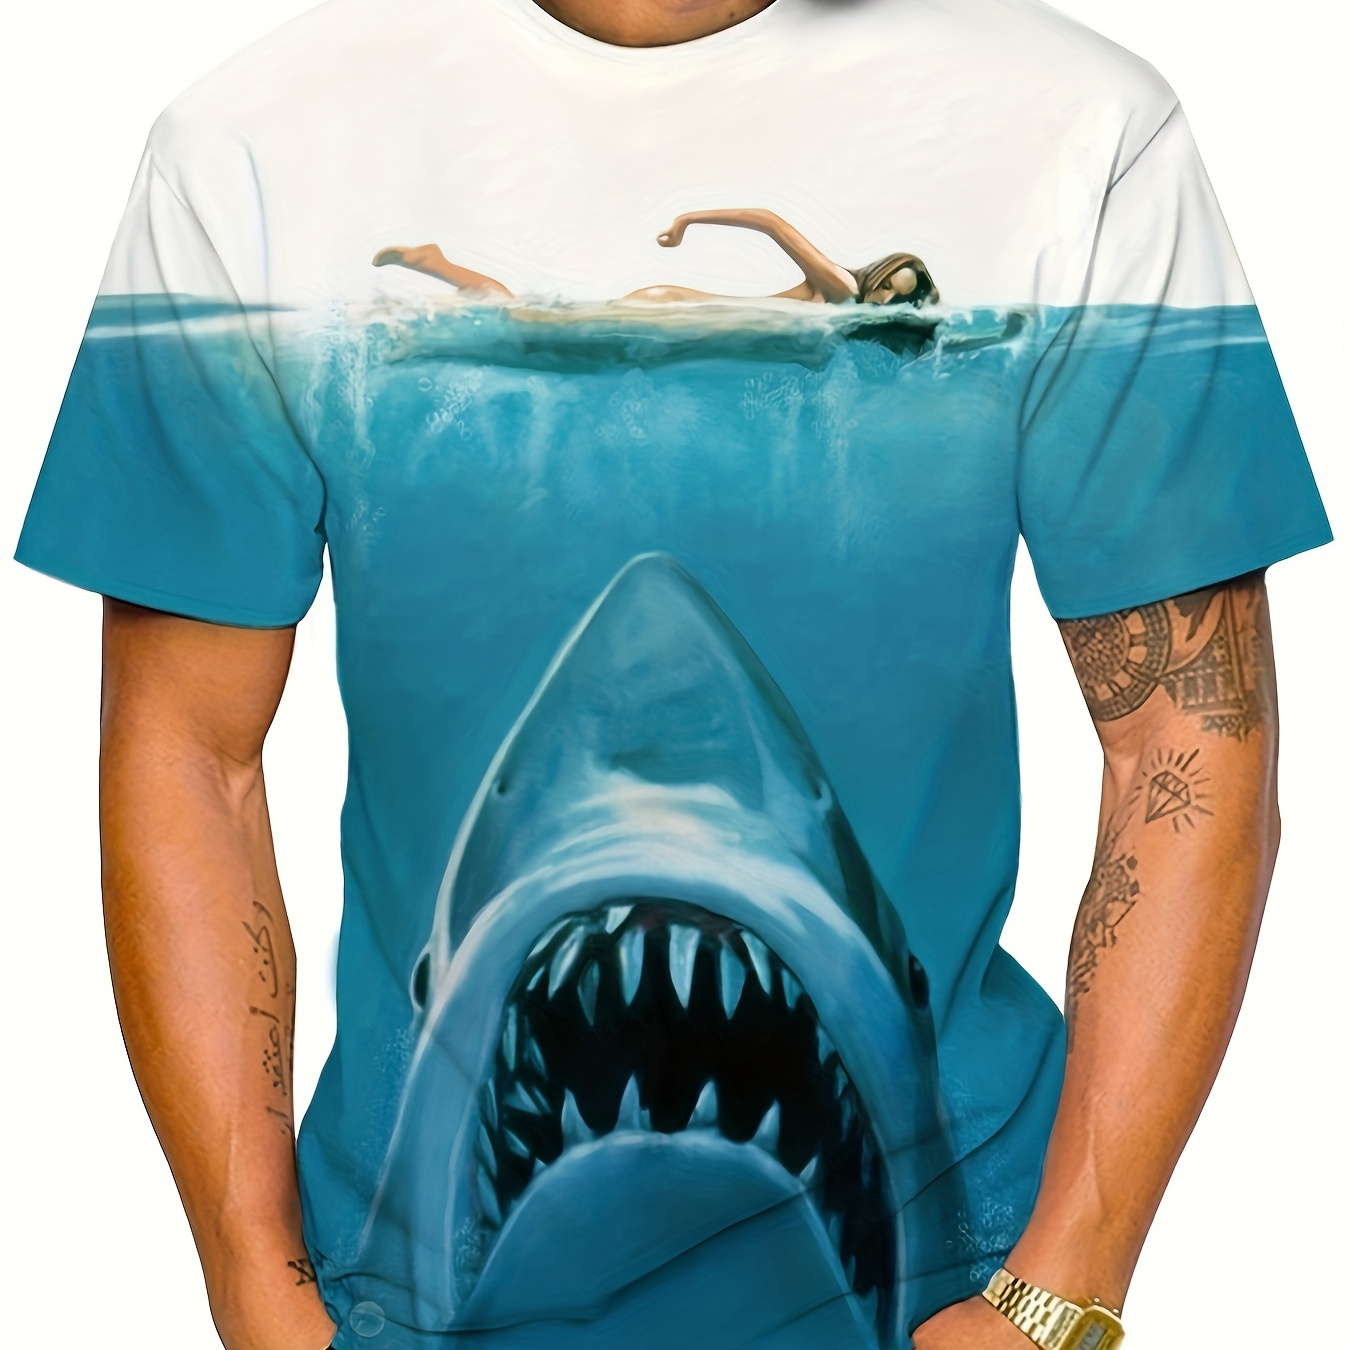 

Men's Thrill Style 3d Digital Shark Swimming Female Figure Pattern Print T-shirt With Crew Neck And Short Sleeve, Tops For Summer Outdoors Wear